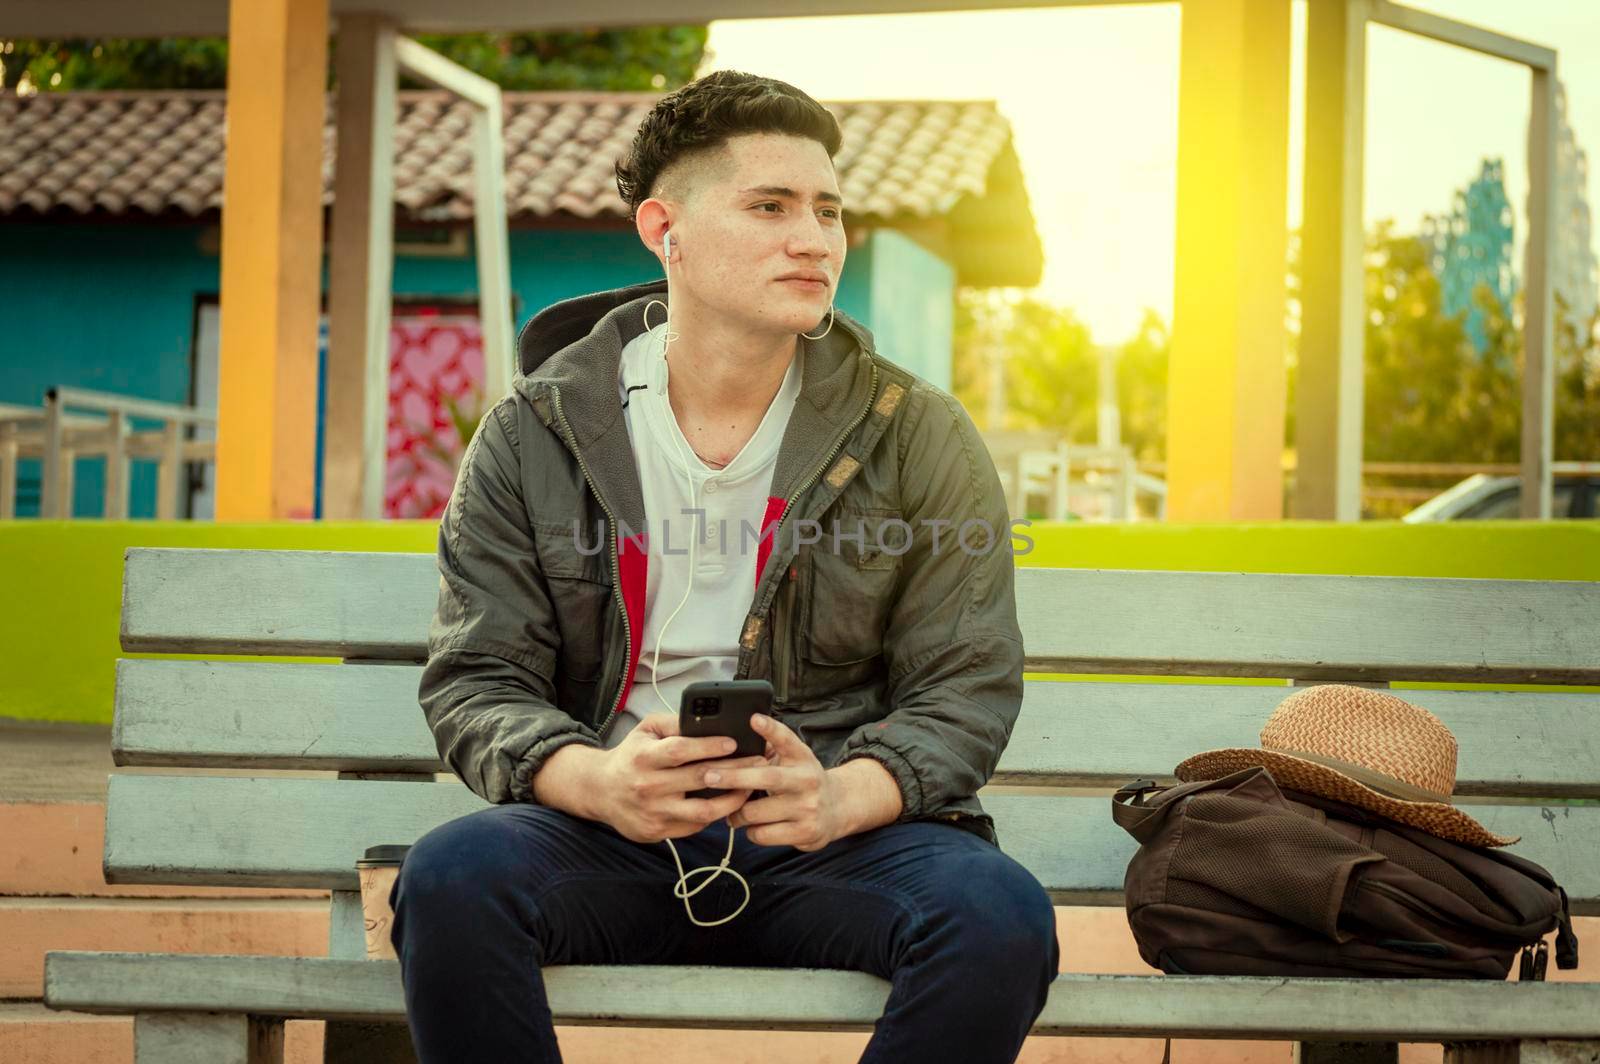 An attractive guy listening to music on a bench, Latin man sitting on a bench listening to music with his phone